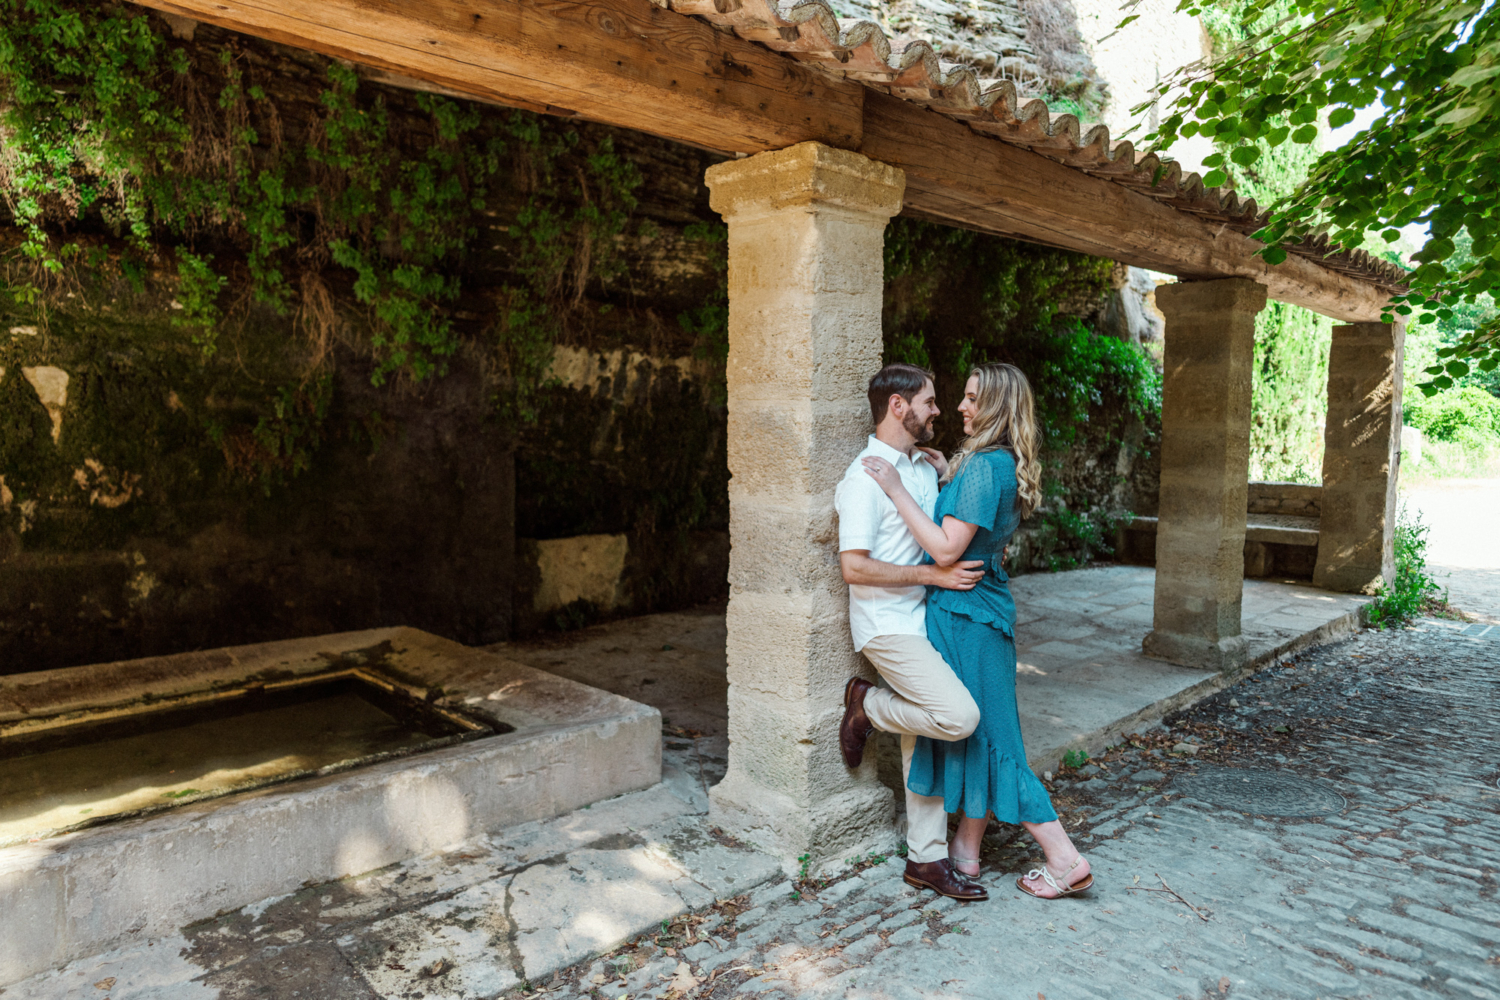 couple embrace near an old lavoir in france